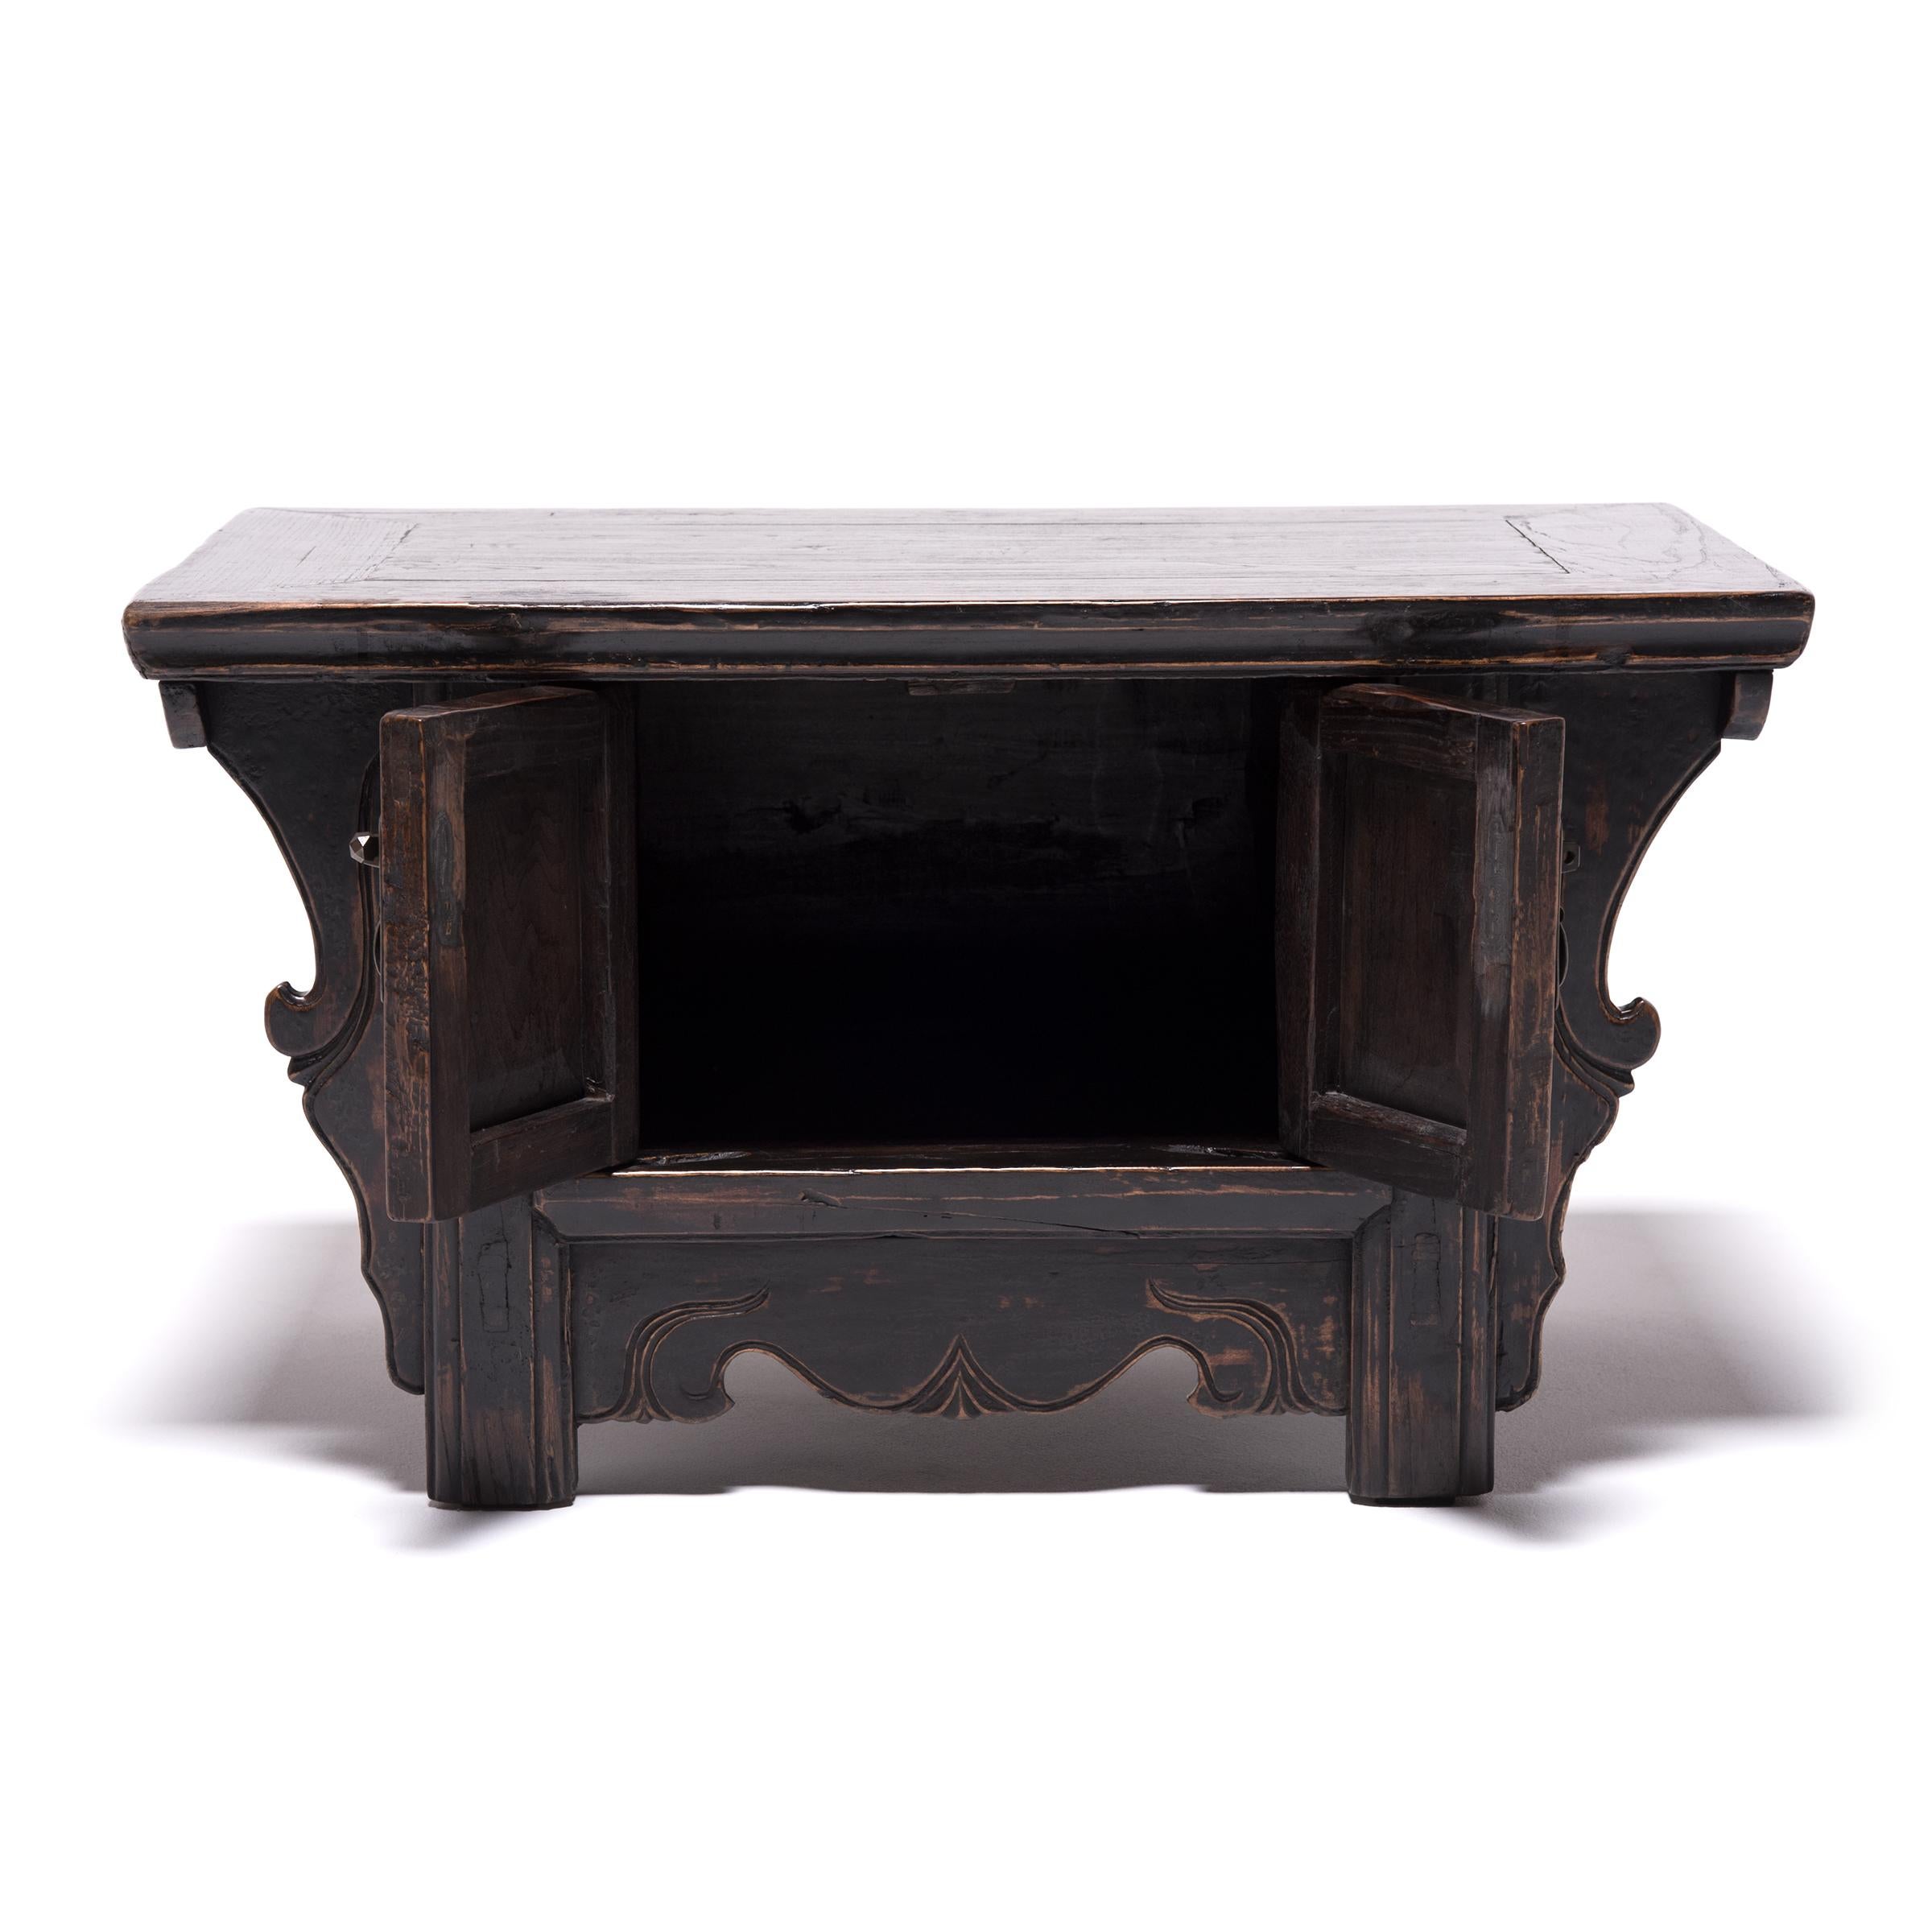 In a traditional northern Chinese home, a chest like this would have been placed beside a raised platform called a kang, which was used as a sleeping and living area. The cabinet would have kept essential items close at hand in intimate spaces. The